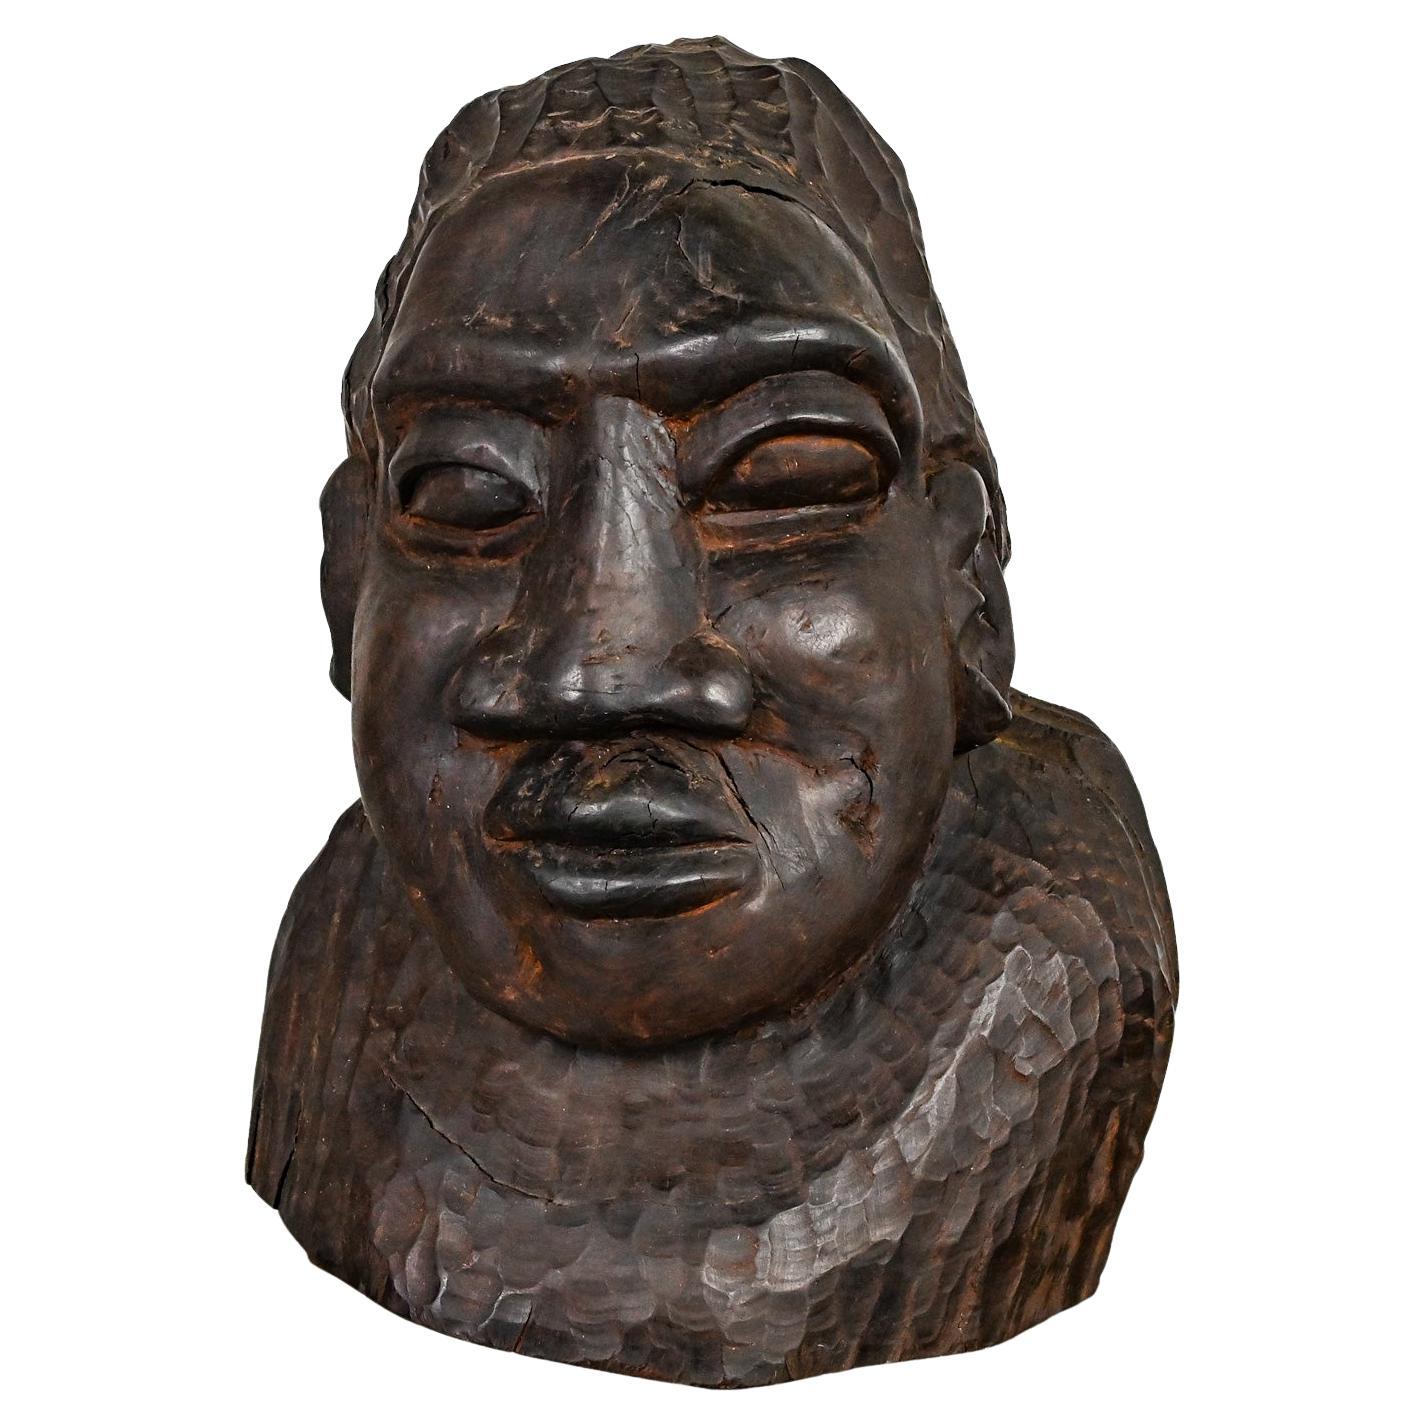 20th Century Tribal Figural Head Bust by David Tennant Hand Carved Ebony Wood   For Sale